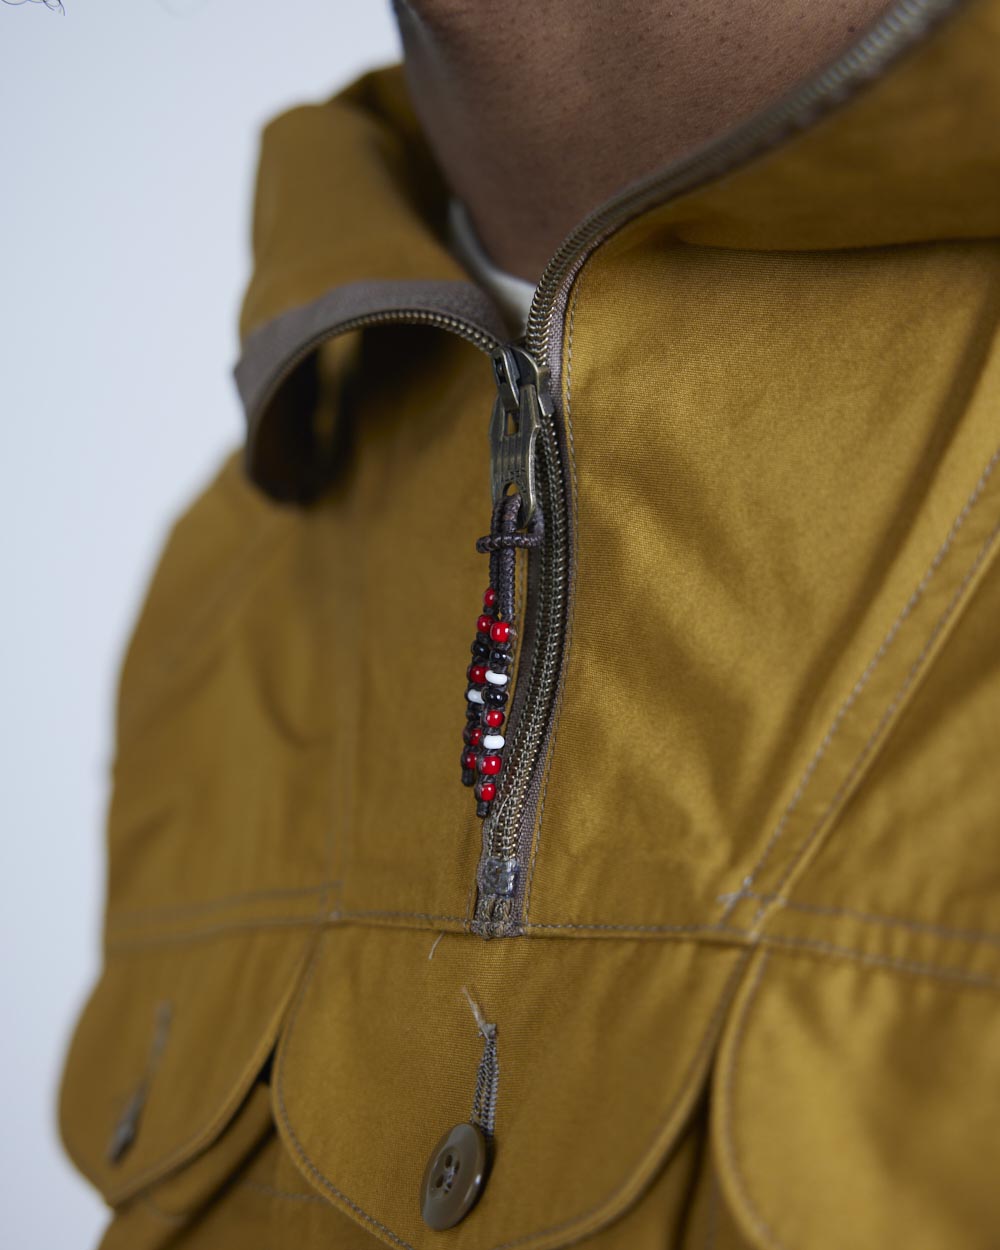 Gypsy & Sons Ventile Anorak - Gold